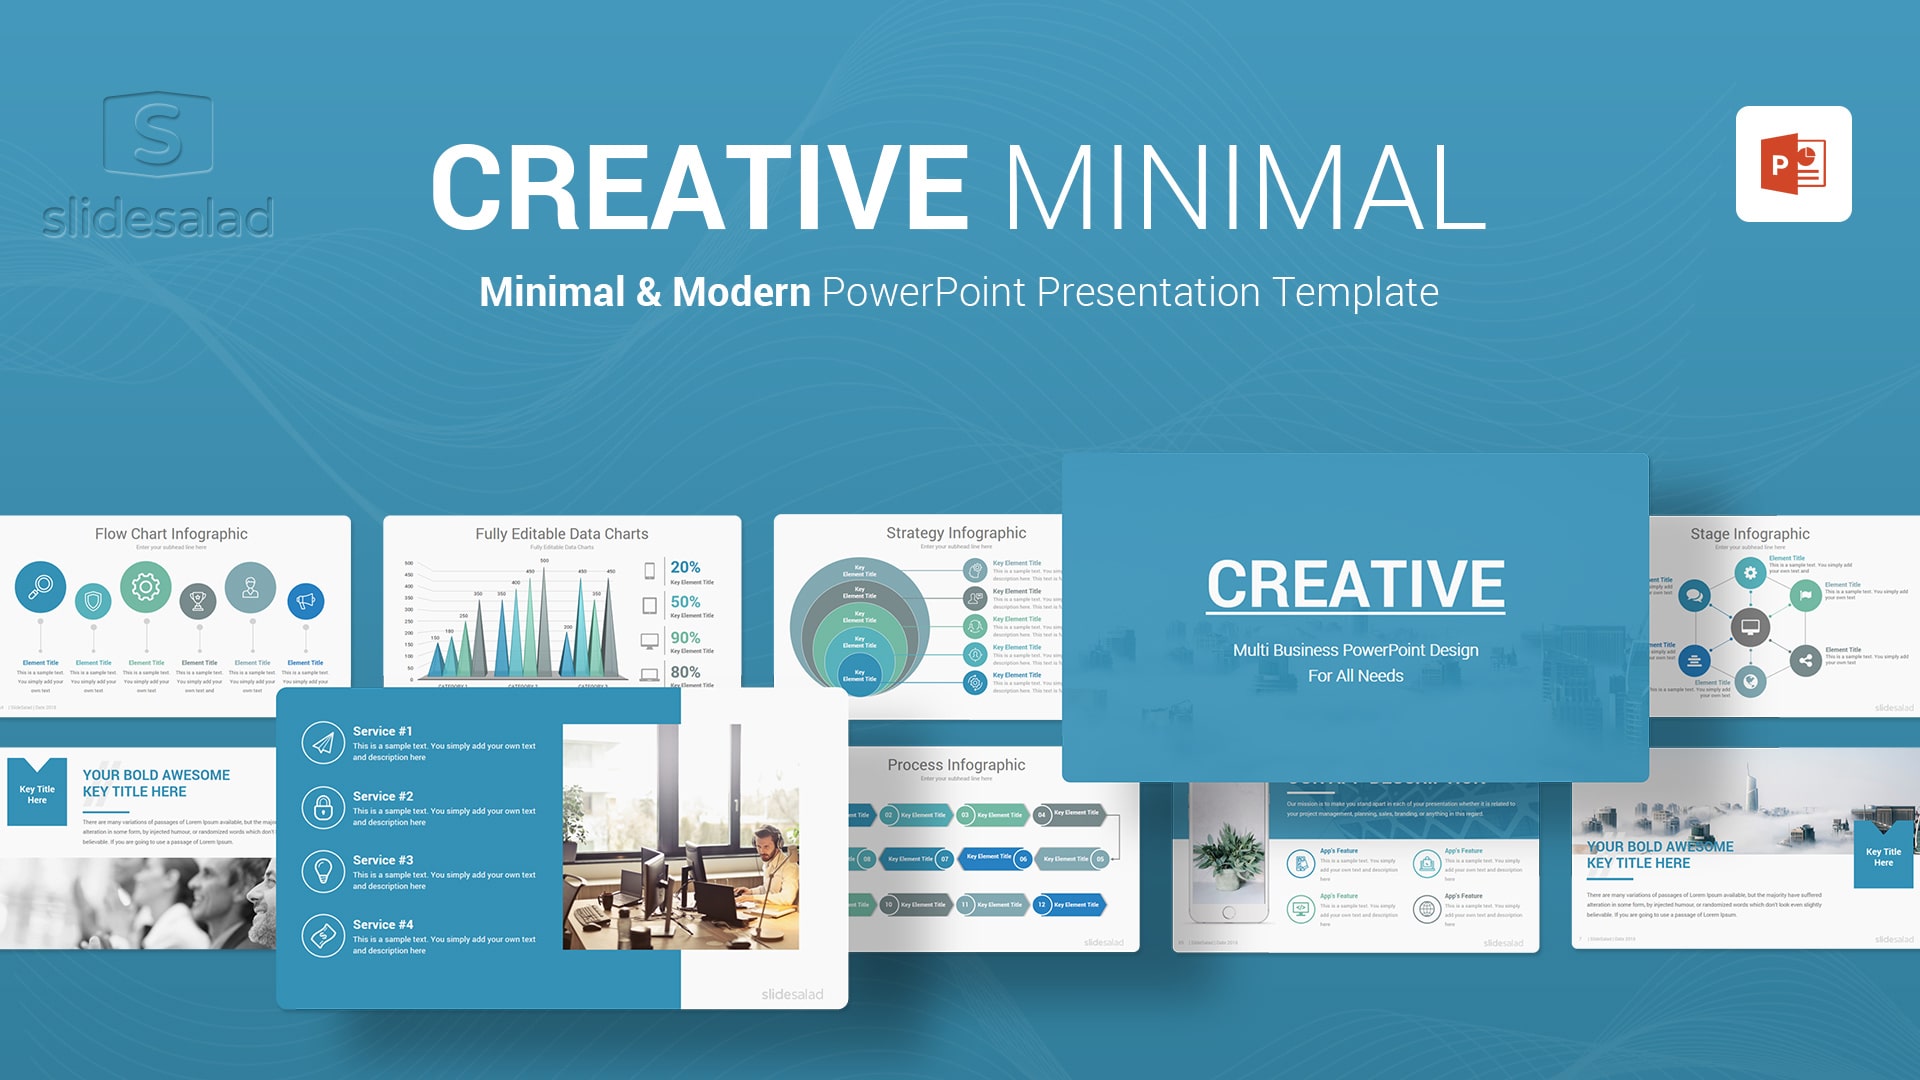 Creative Business PowerPoint Templates